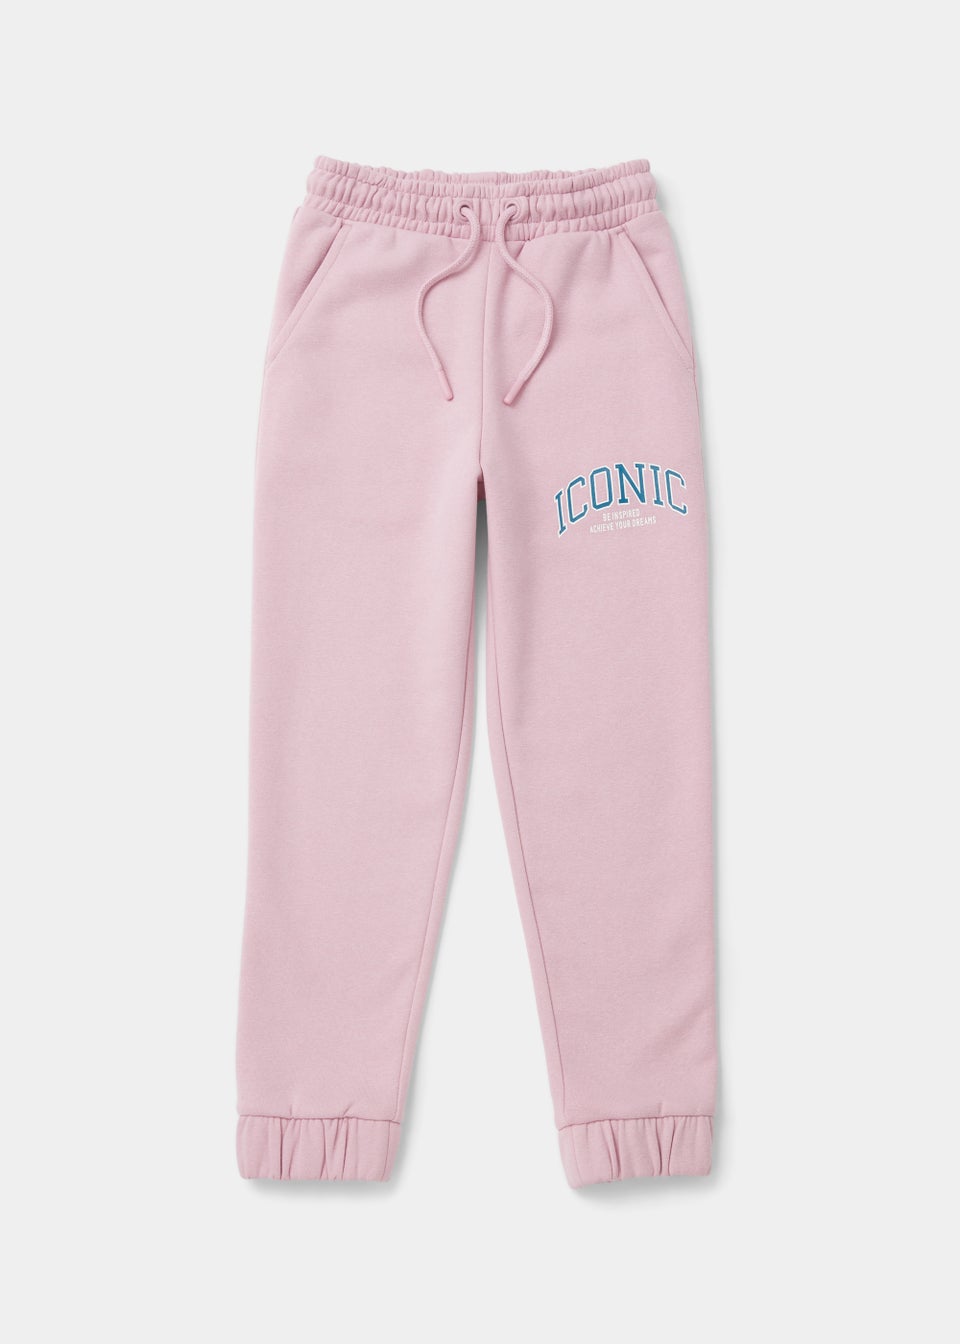 Girls Pink Iconic Joggers (4-15yrs)